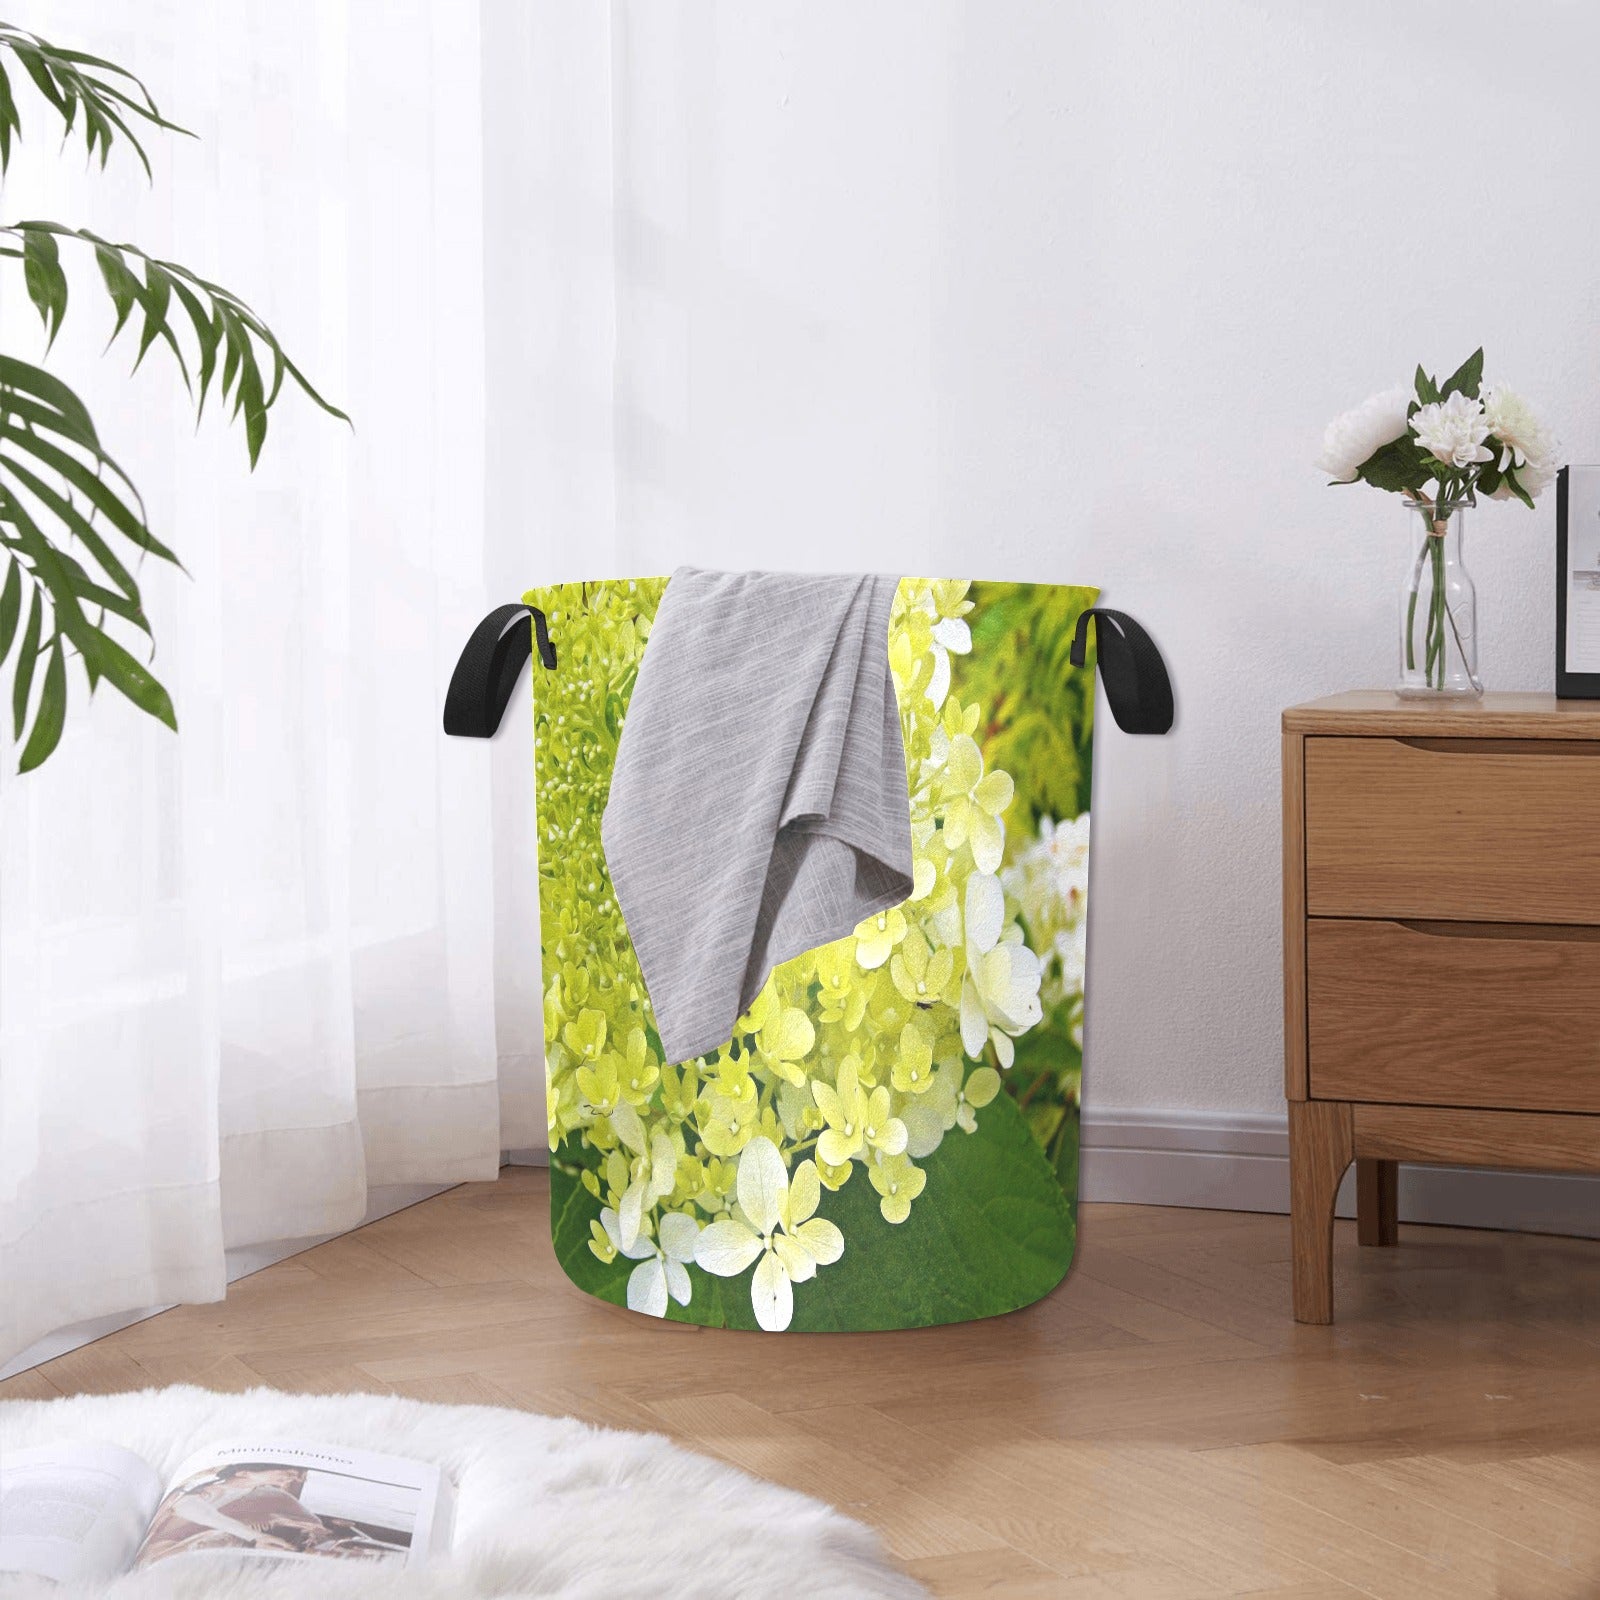 Fabric Laundry Basket with Handles, Elegant Chartreuse Green Limelight Hydrangea